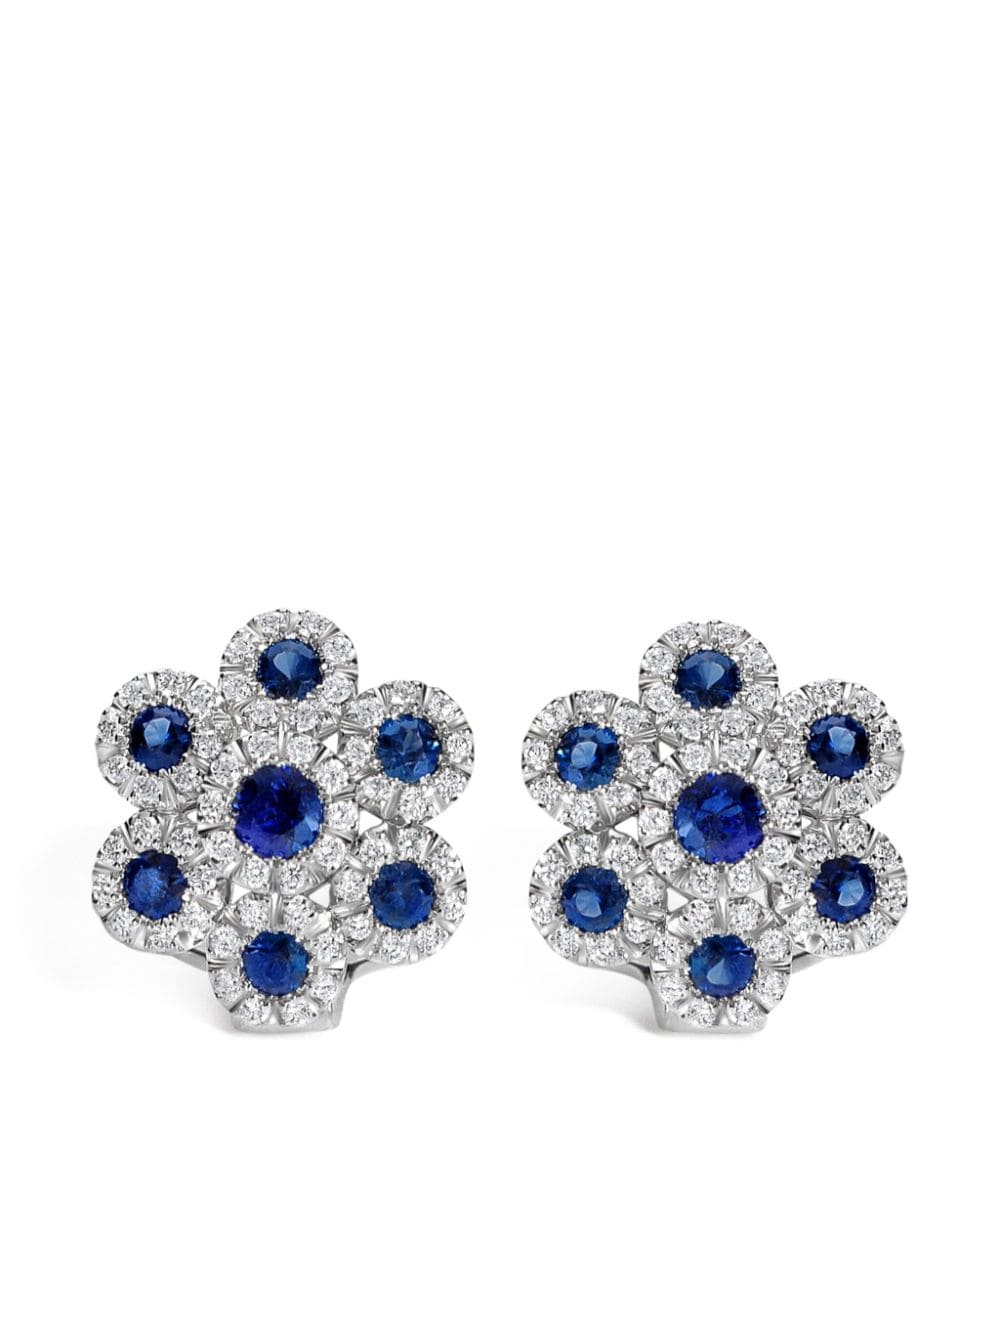 18kt white gold Augusta sapphire and diamond earrings